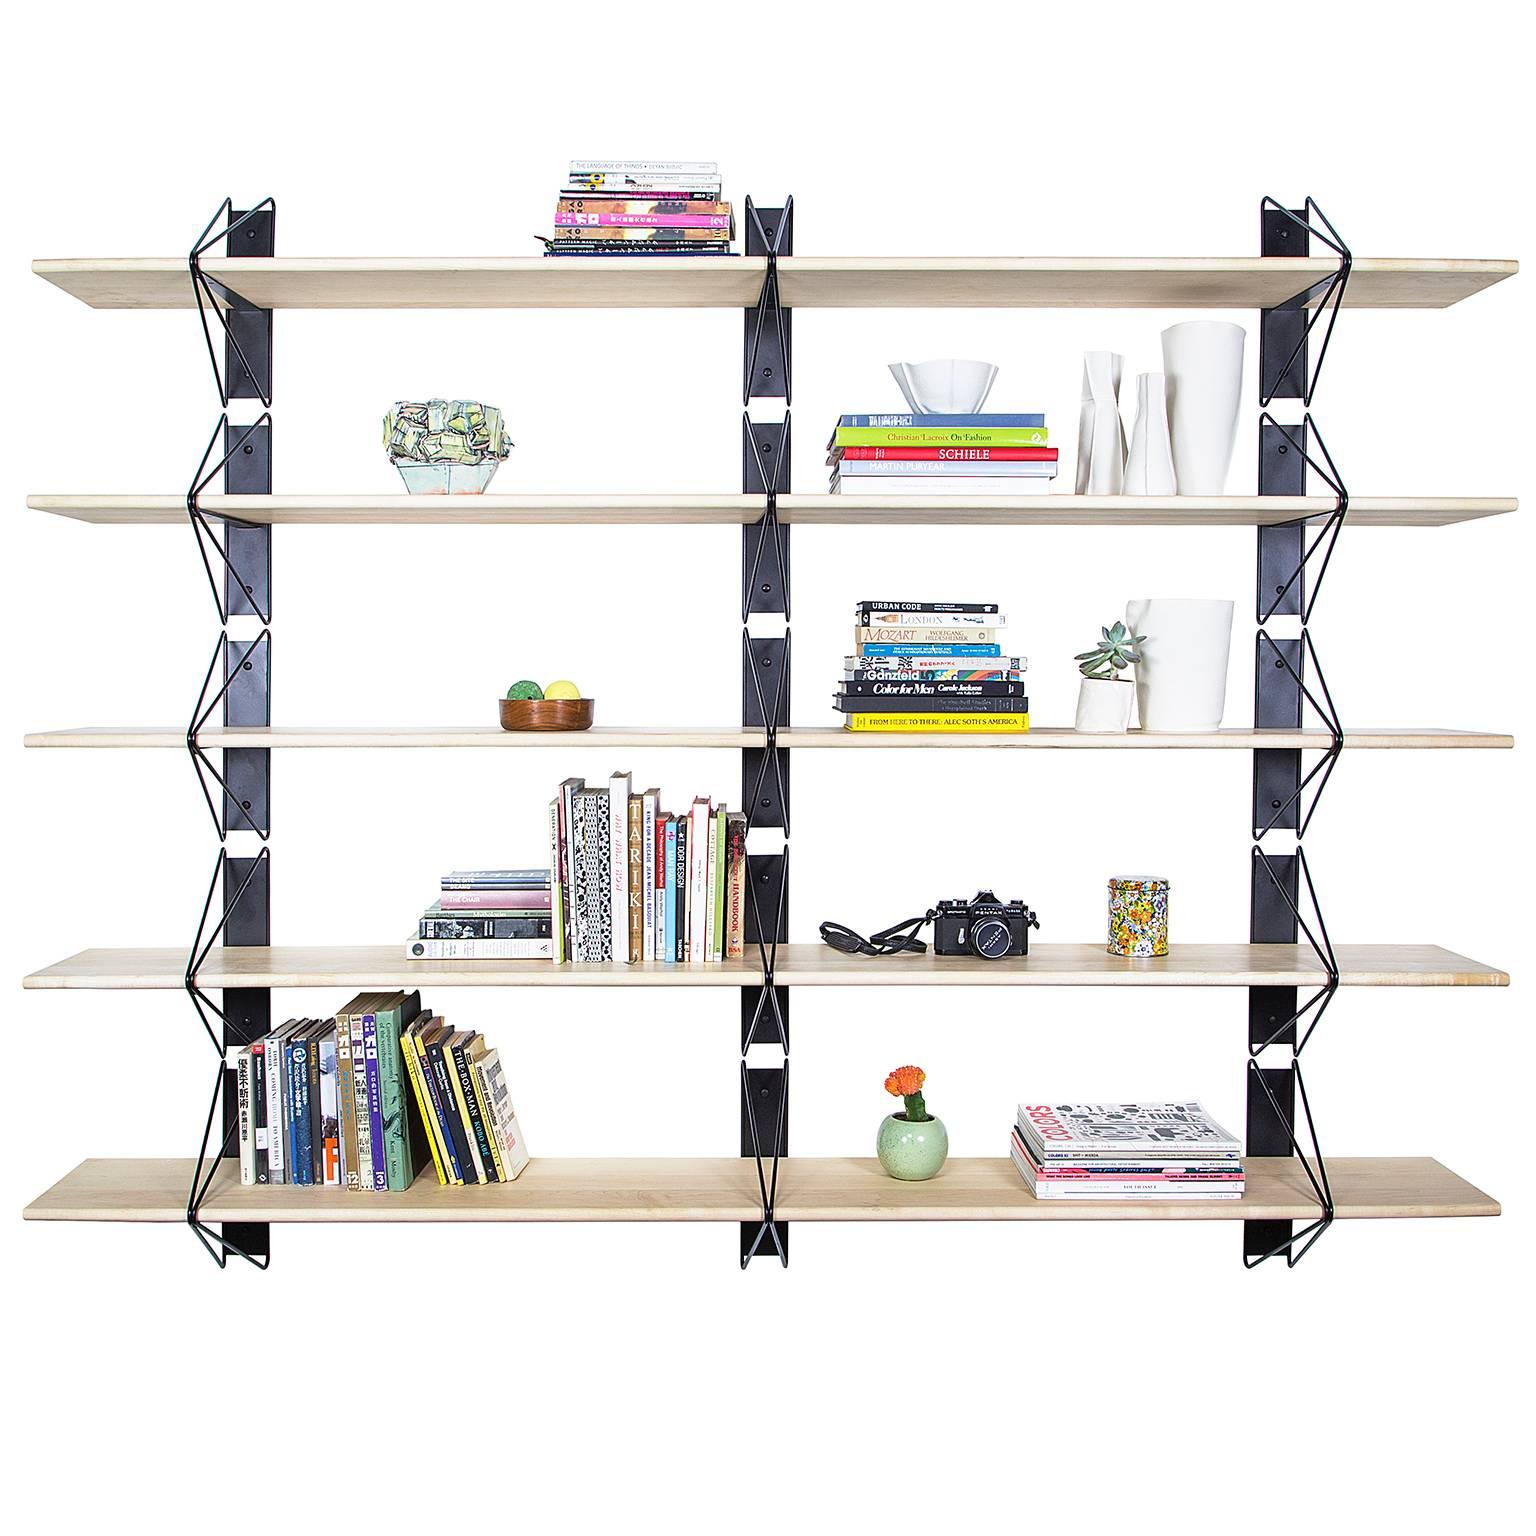 Powder-Coated Set of 3 Strut Shelves from Souda, Black and Walnut, Made to Order For Sale